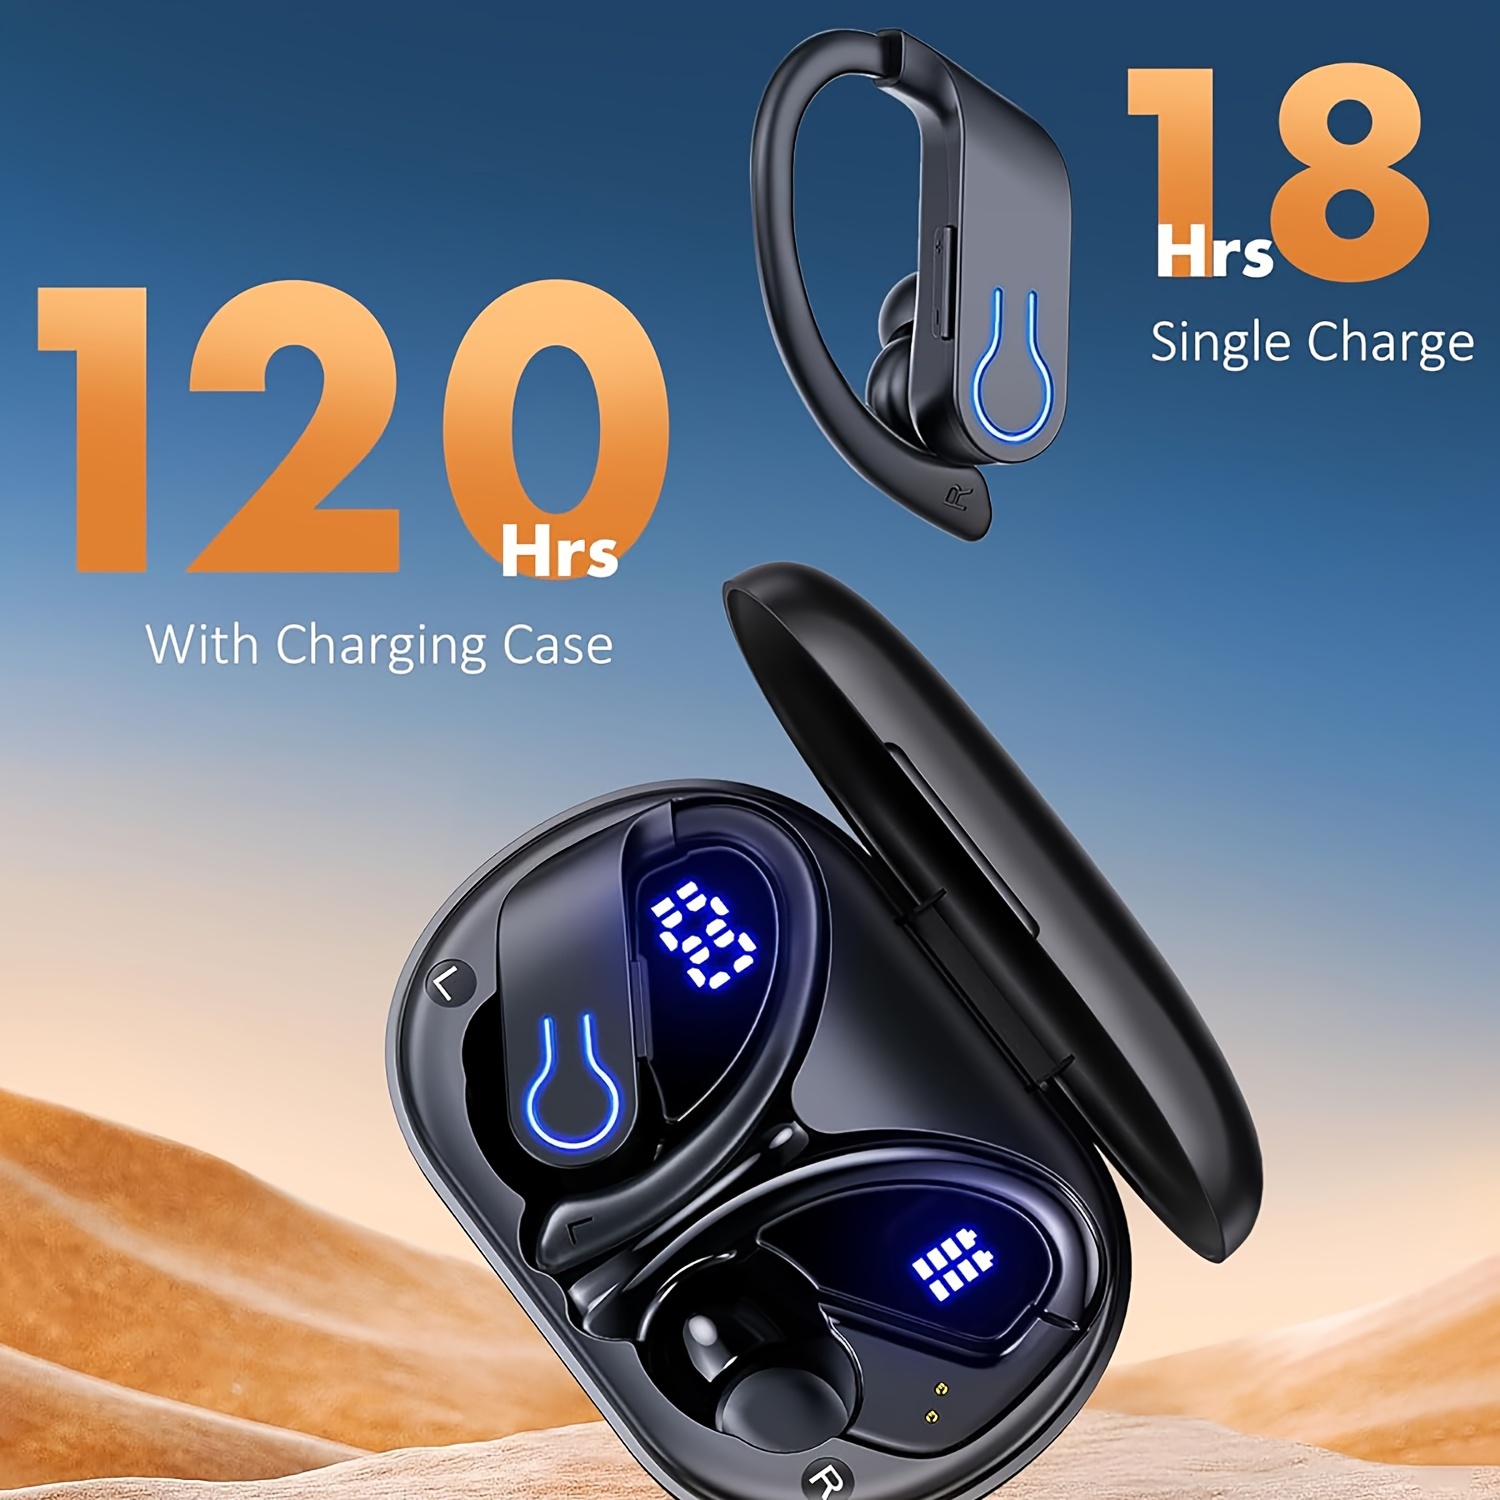 

Wireless Earphones Suitable For Sports With 120 Hours Of Playback Time, High Fidelity Stereo Earphones With Led Display Charging Case, Suitable For Running And Exercise Earphones